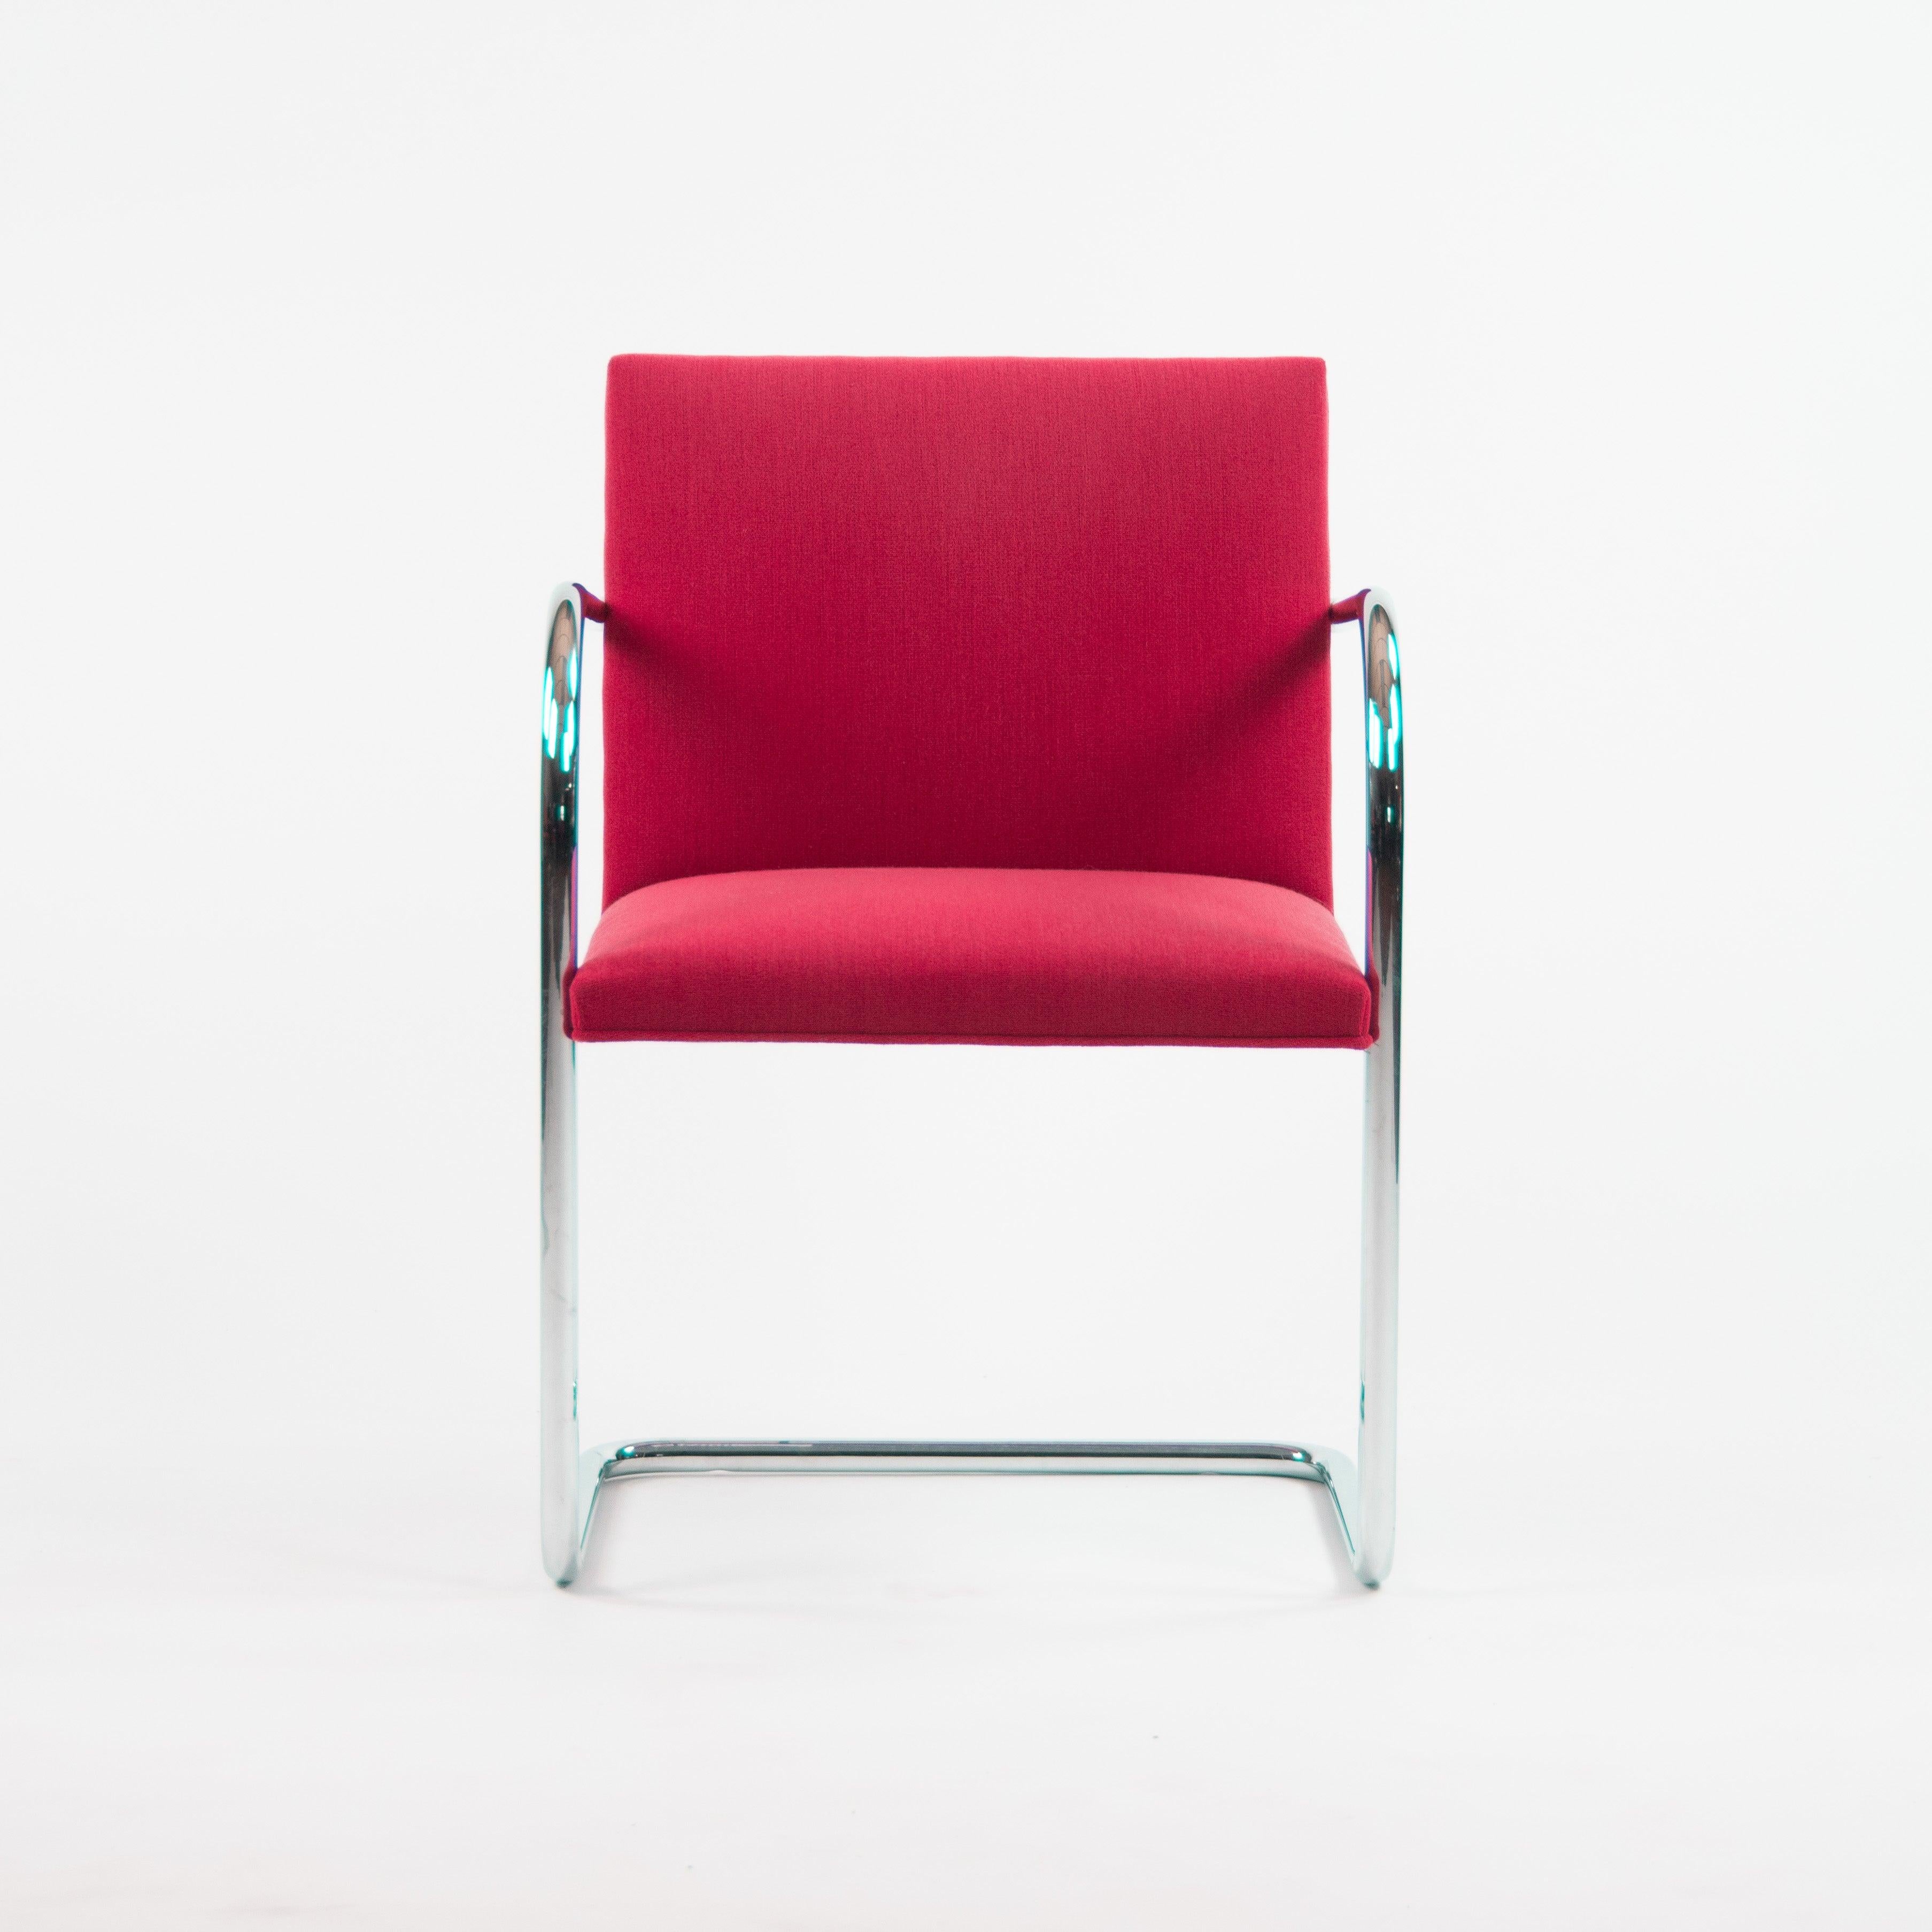 Listed for sale is an authentic(sold individually) labelled Mies Van Der Rohe Brno chair in red fabric with a lovely gleaming chromed tubular steel frame.


The chairs were manufactured in the mid 2000's to early 2010's and came directly from